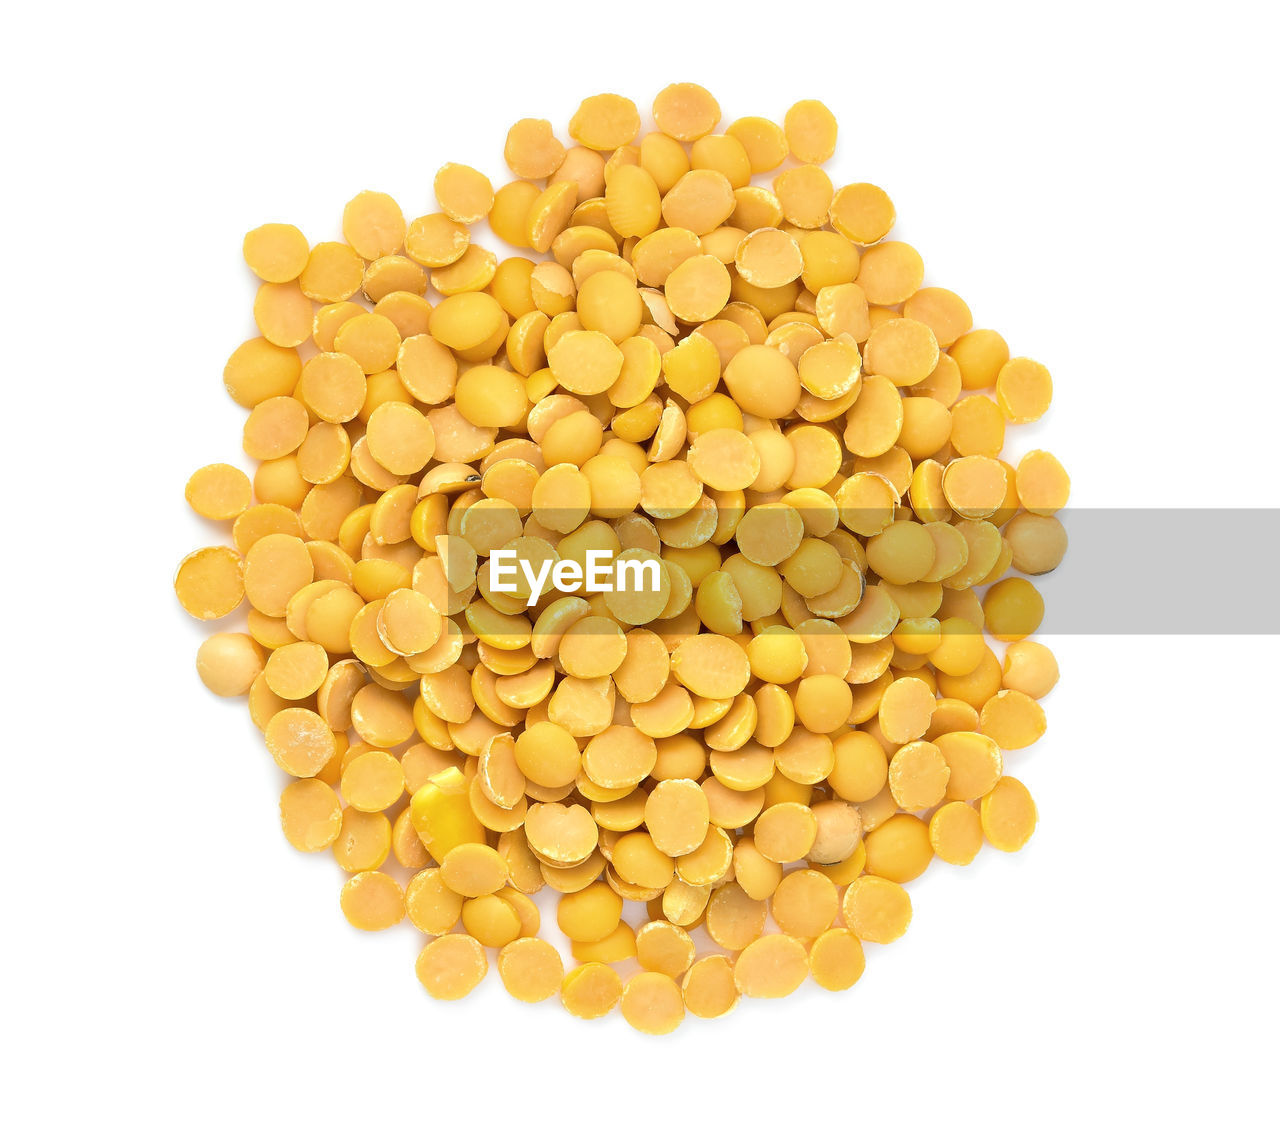 Yellow lentils over white background